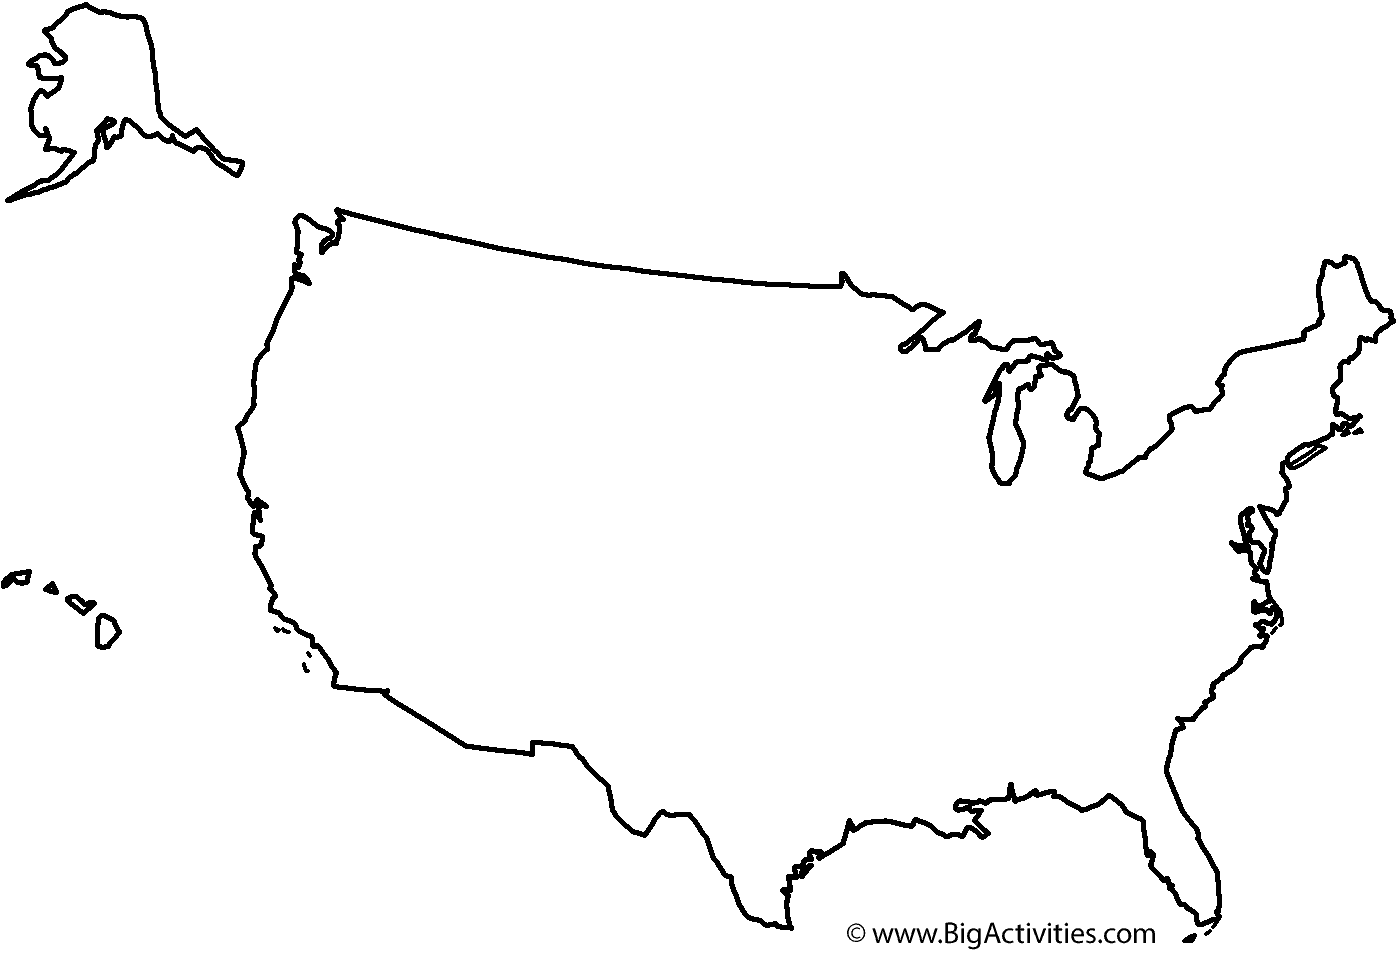 Download Map of the United States with title - Coloring Page ...